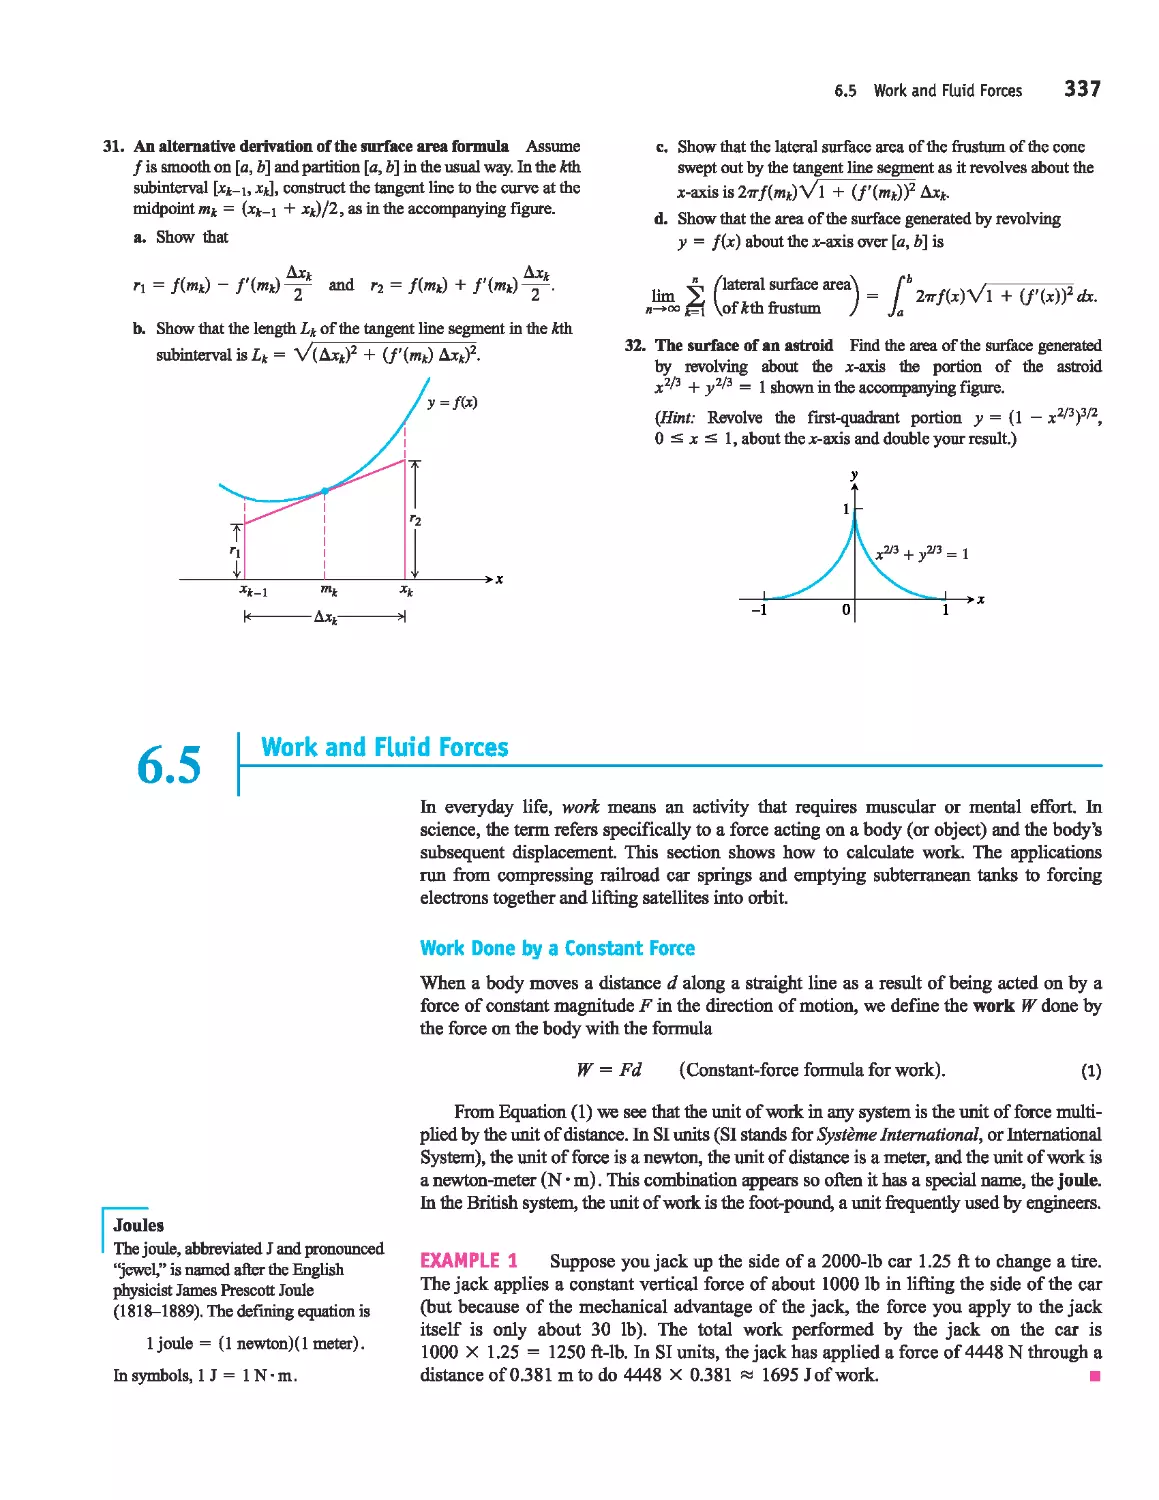 6.5 - Work and Fluid Forces